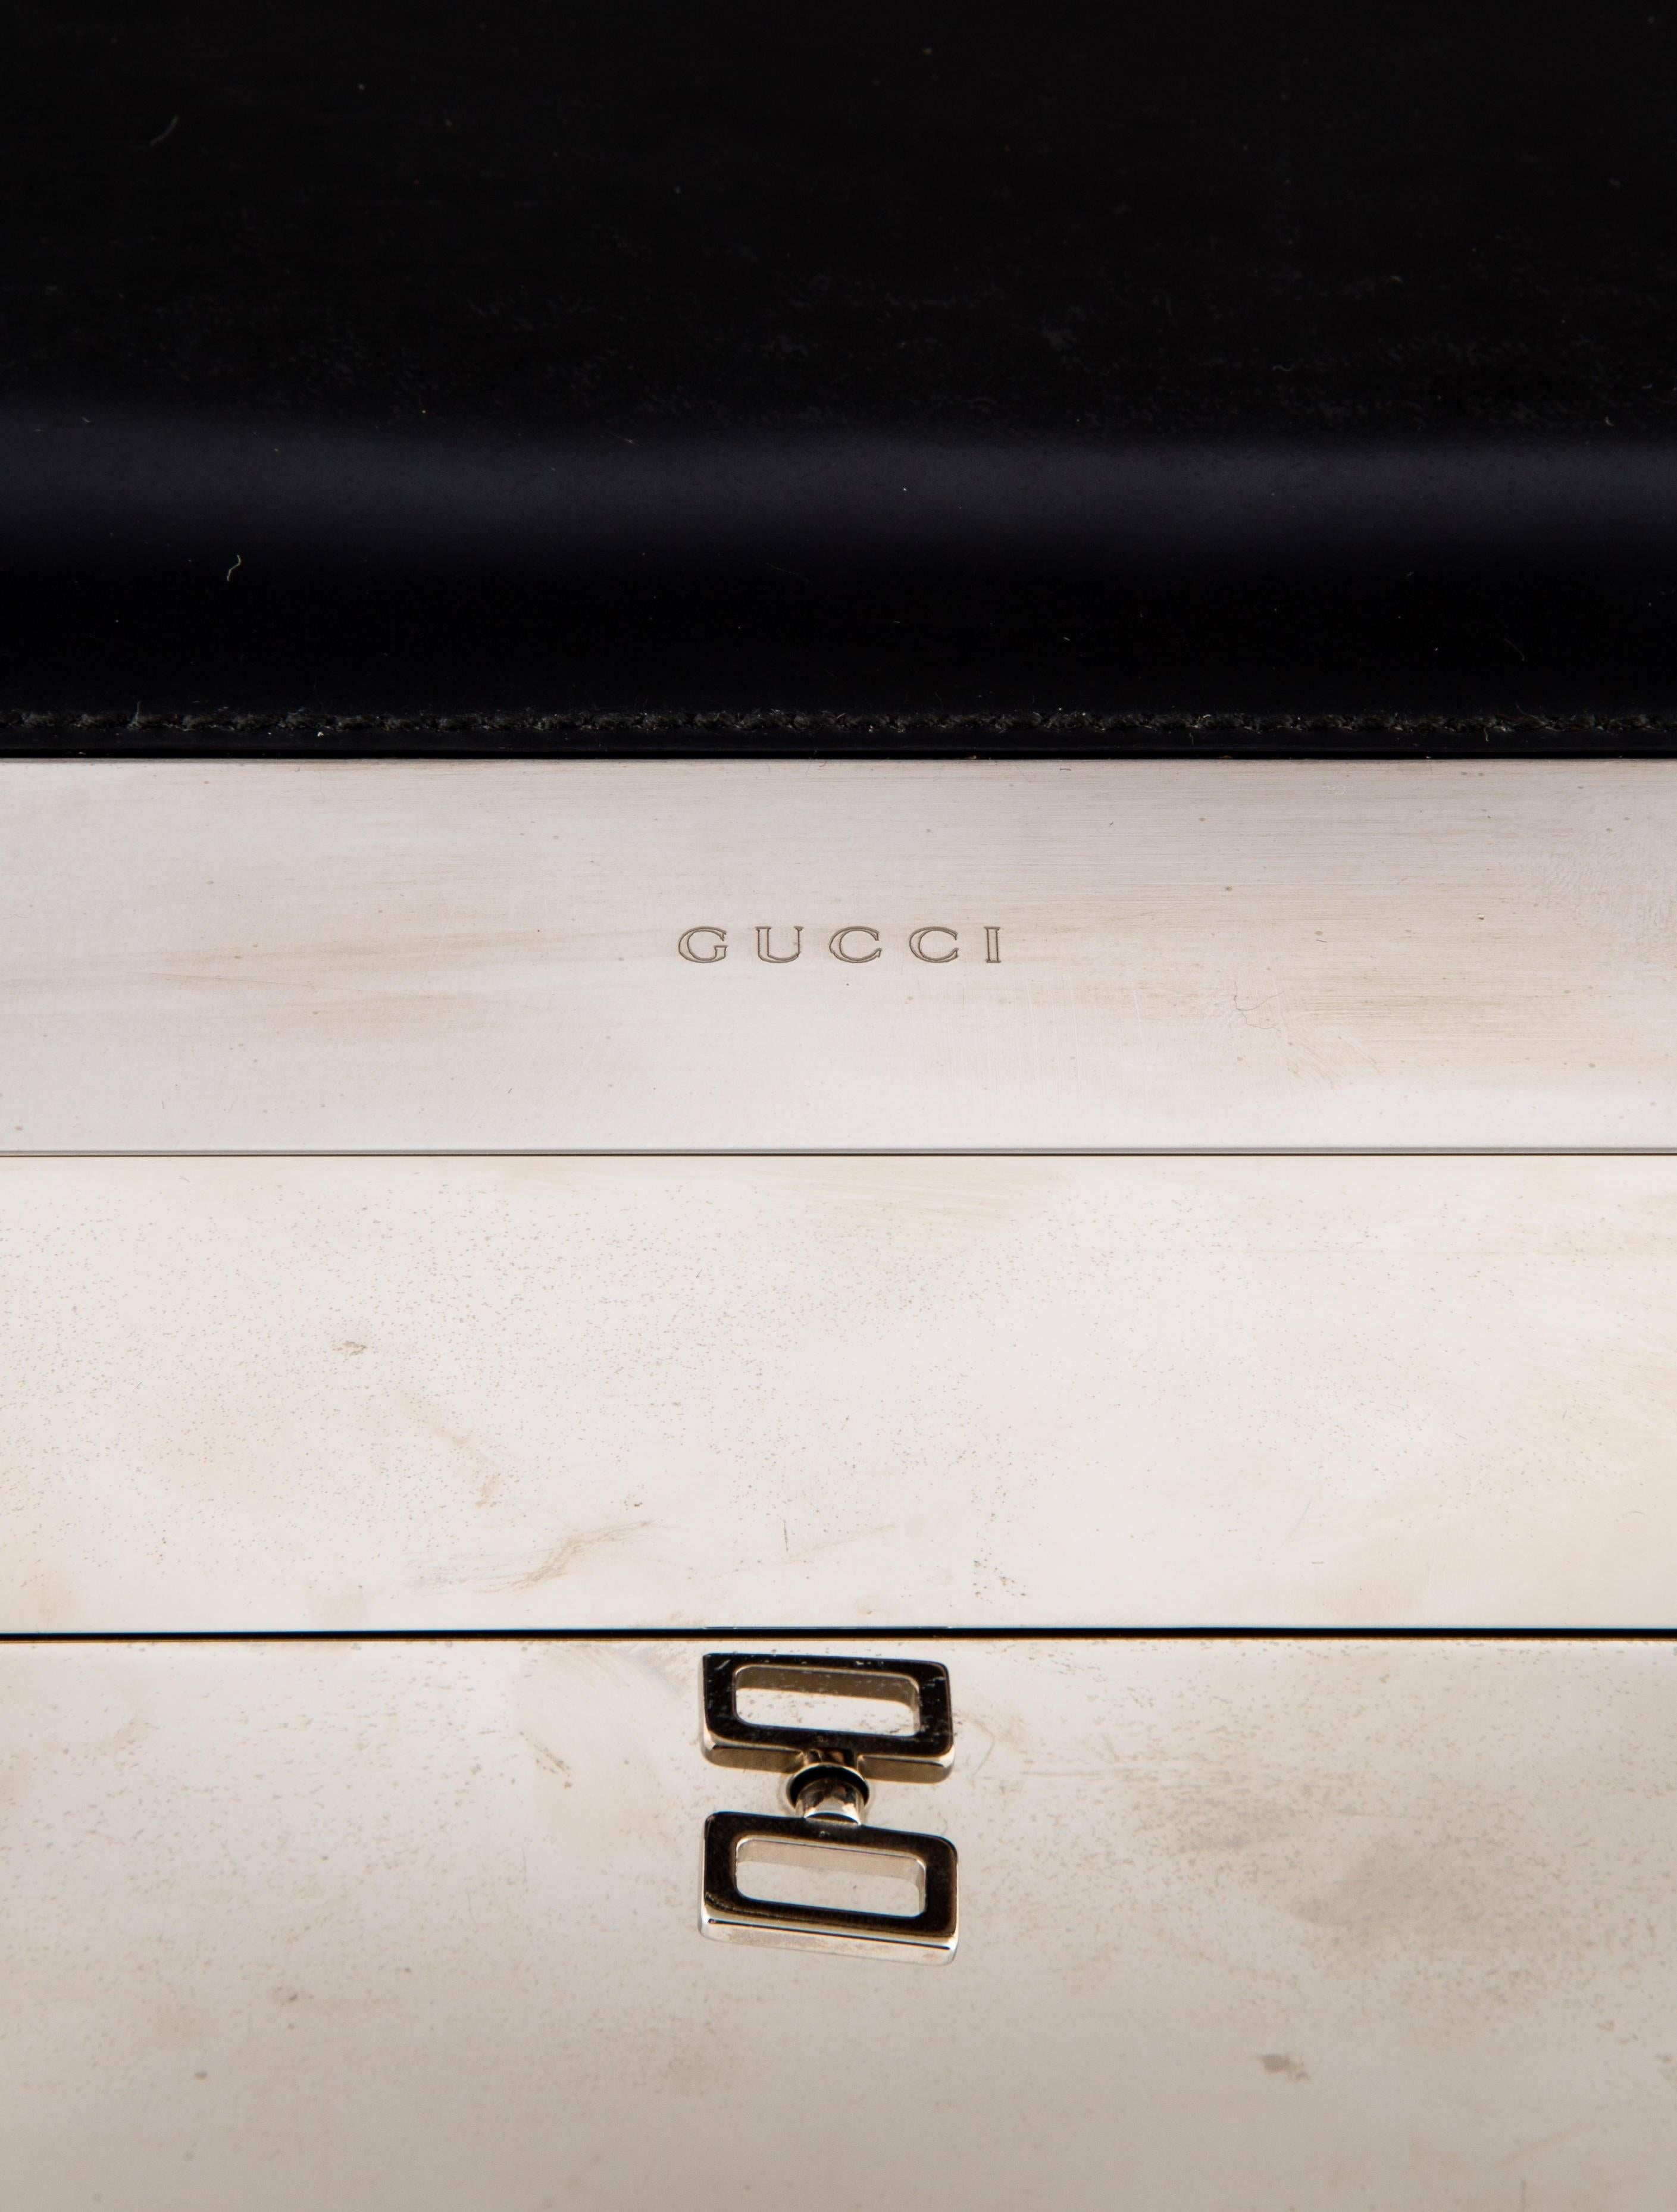 CURATOR'S NOTES

Gucci Leather Stainless Steel Men's Storage Table Desk Cigar Humidor Case Box 

Leather
Silver tone hardware
Cedar interior
Temperature gauge
Suede underside
Twist closure
Made in Italy
Measures 14.5" W x 5" H x 9" D